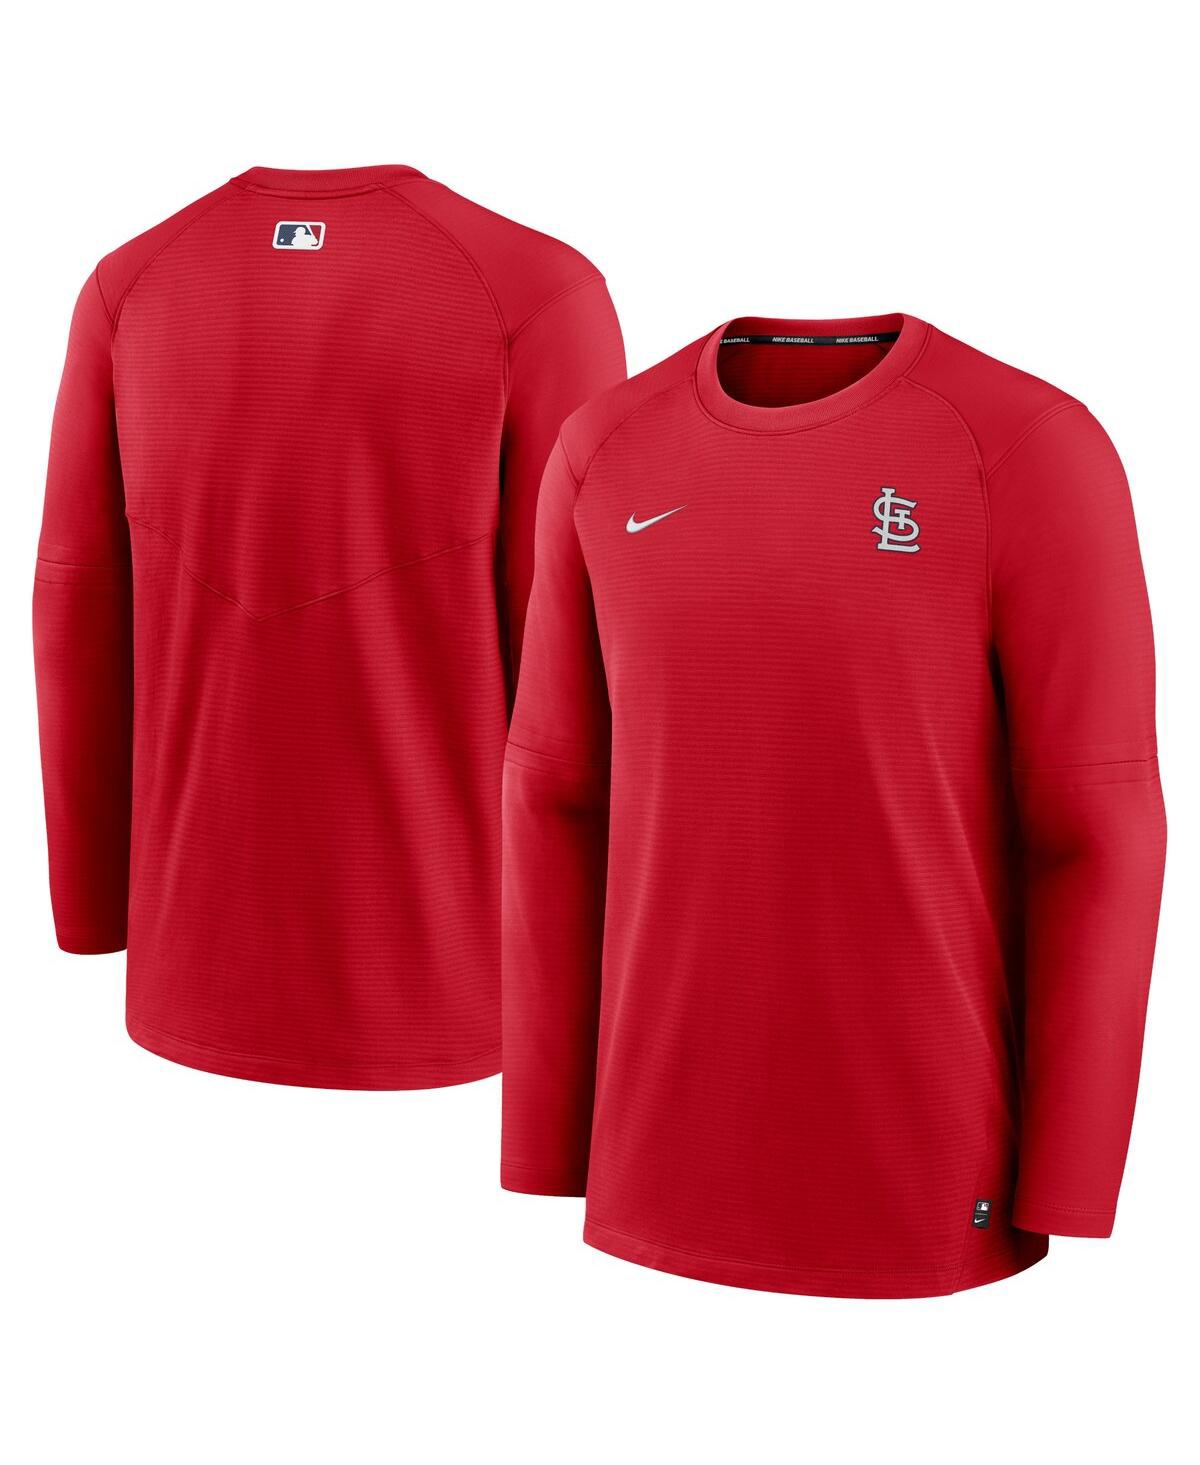 Shop Nike Men's  Red St. Louis Cardinals Authentic Collection Logo Performance Long Sleeve T-shirt